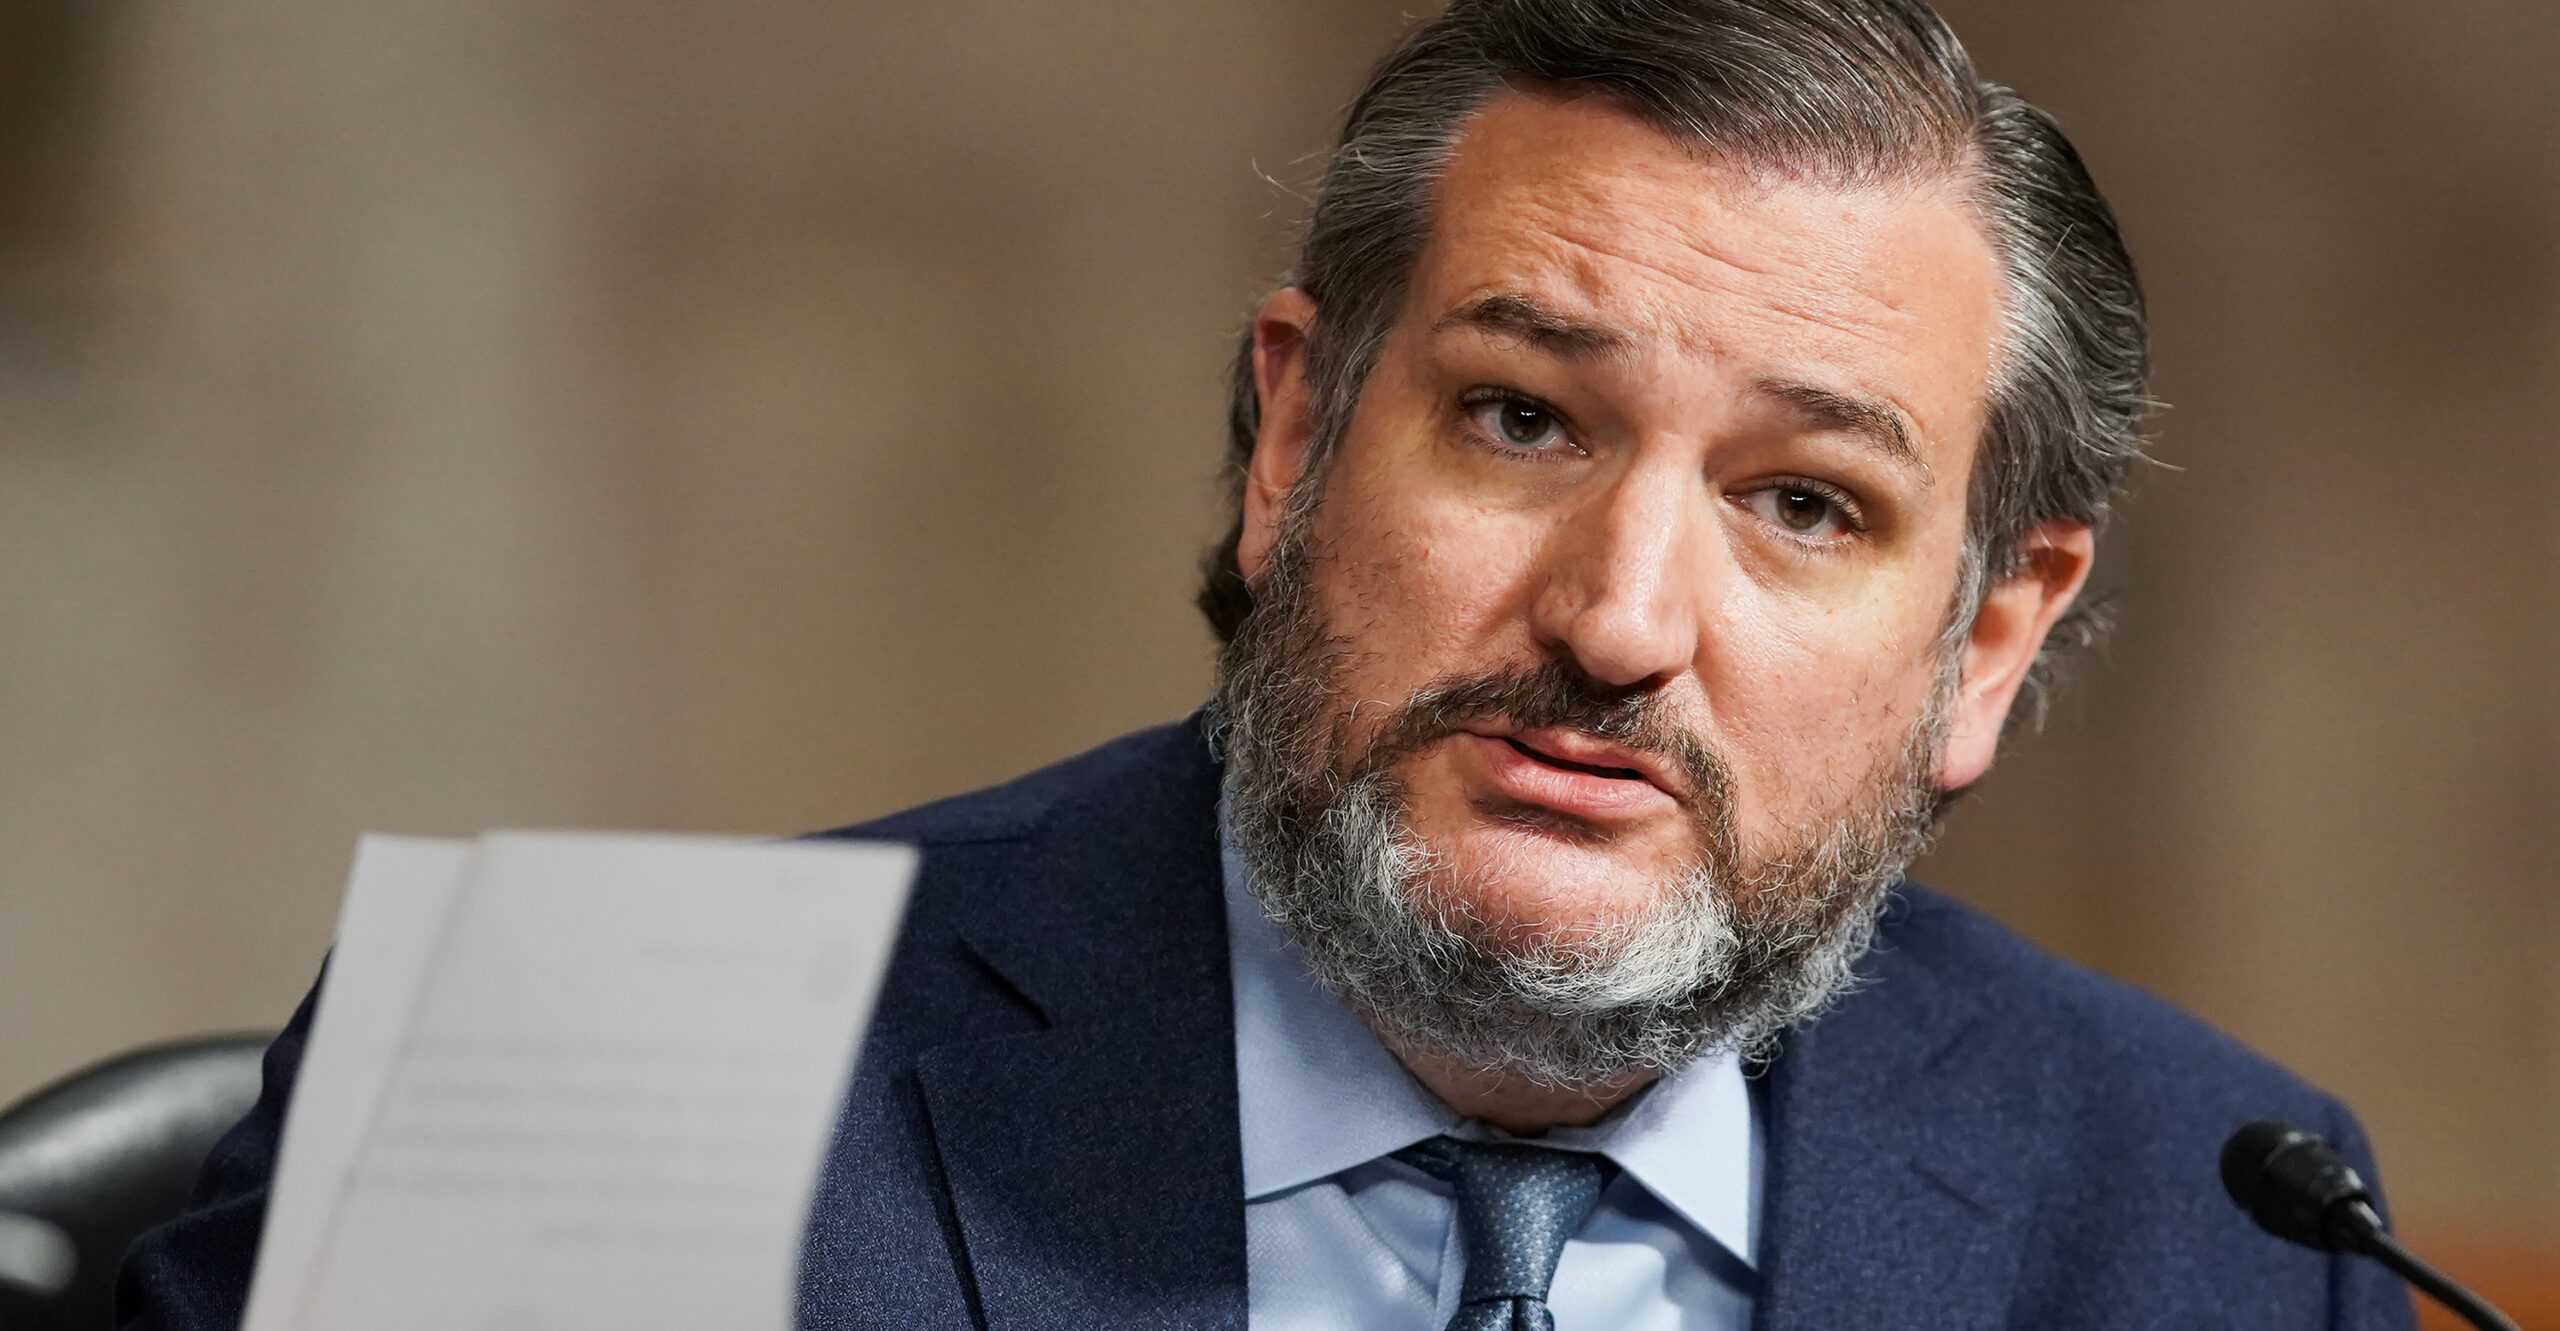 EXCLUSIVE: DC Will Pay If Authorities Dispose of Aborted Baby Remains, Cruz Warns